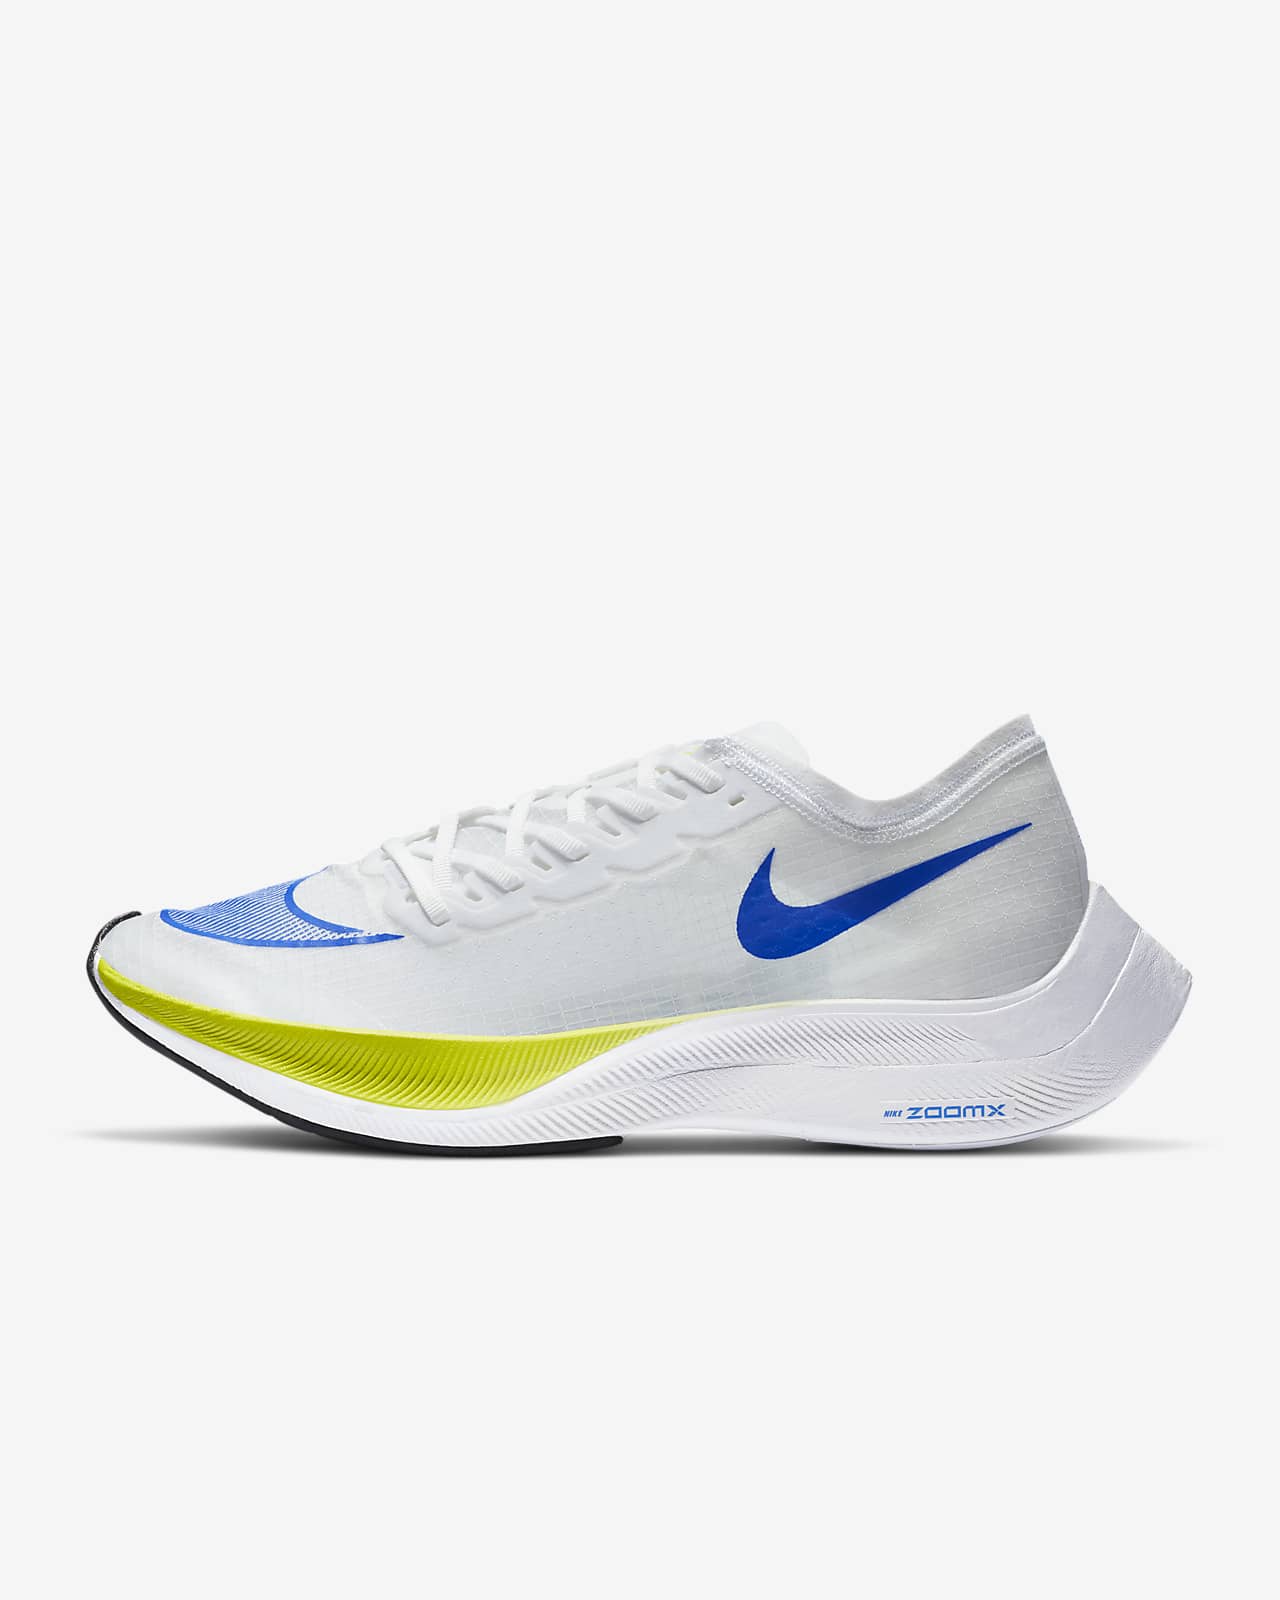 vaporfly running shoes